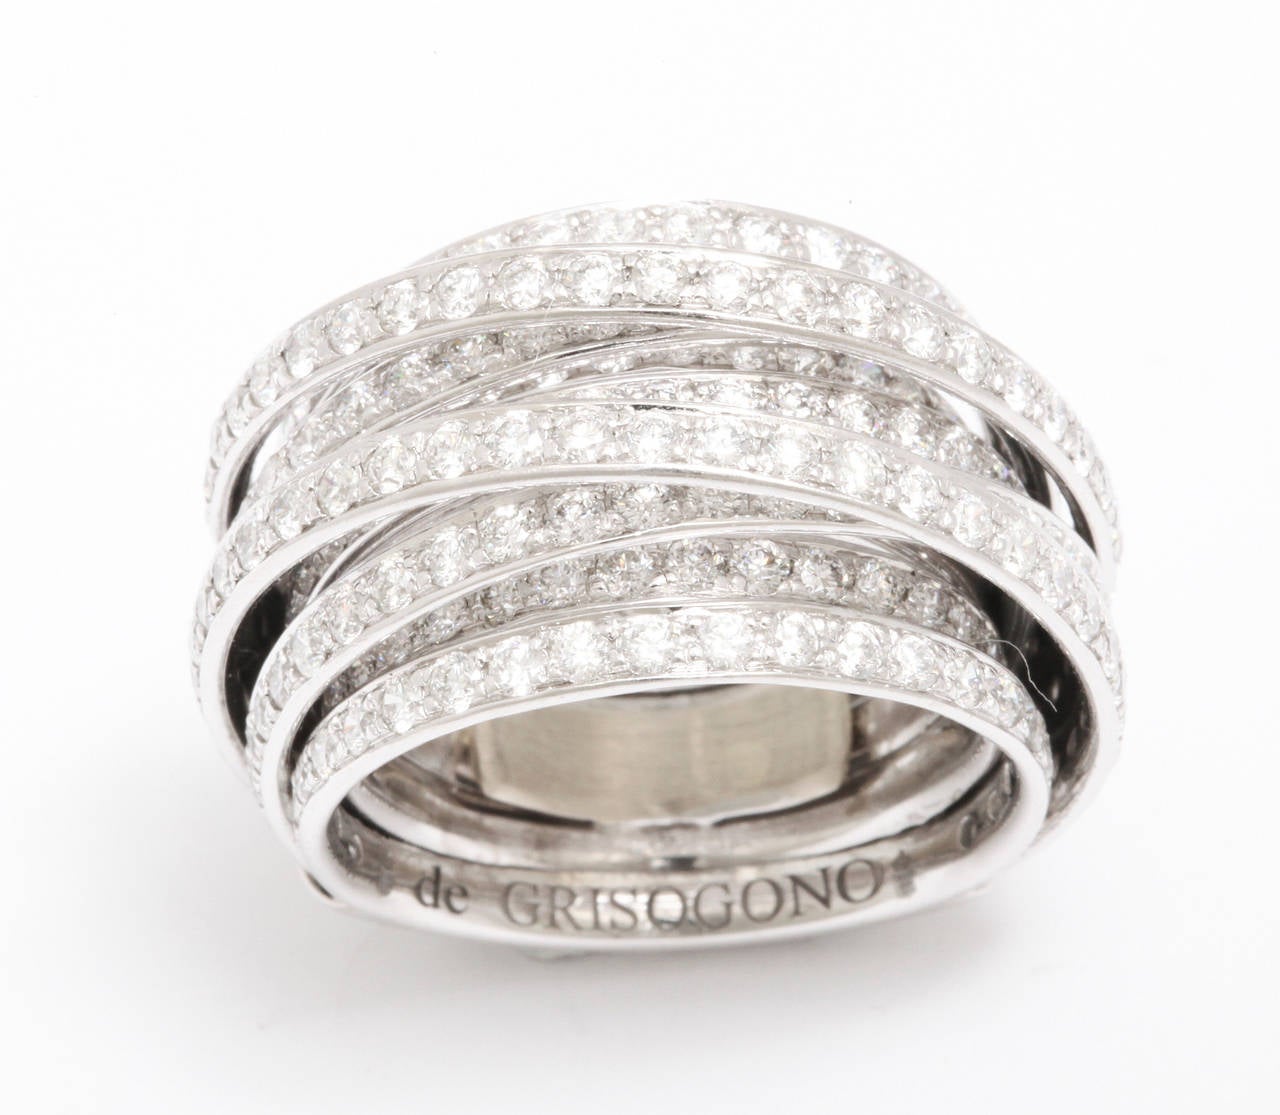 From the magnificent Allegra collection, this bold ring features app. 5cts of the most beautiful white diamonds.  A comfortable size 6, this ring is as comfortable to wear as it is sure to dazzle.  Made in France, signed and numbered.  The